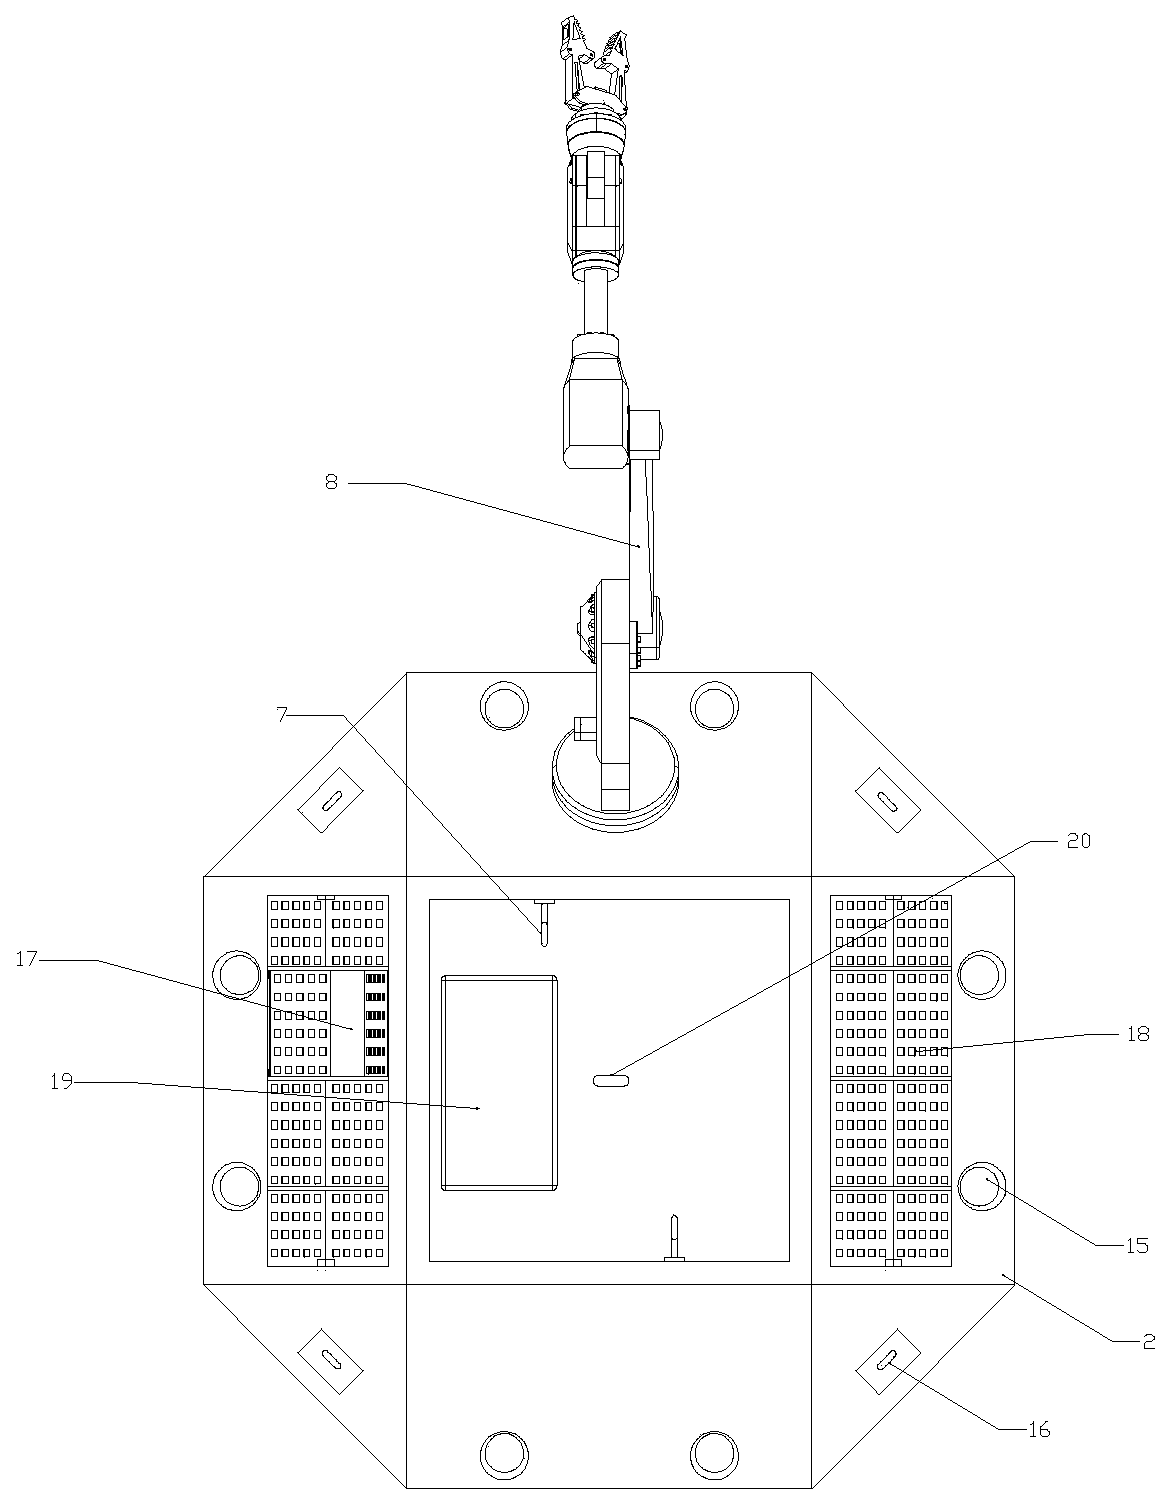 Long-endurance submarine sample collection device